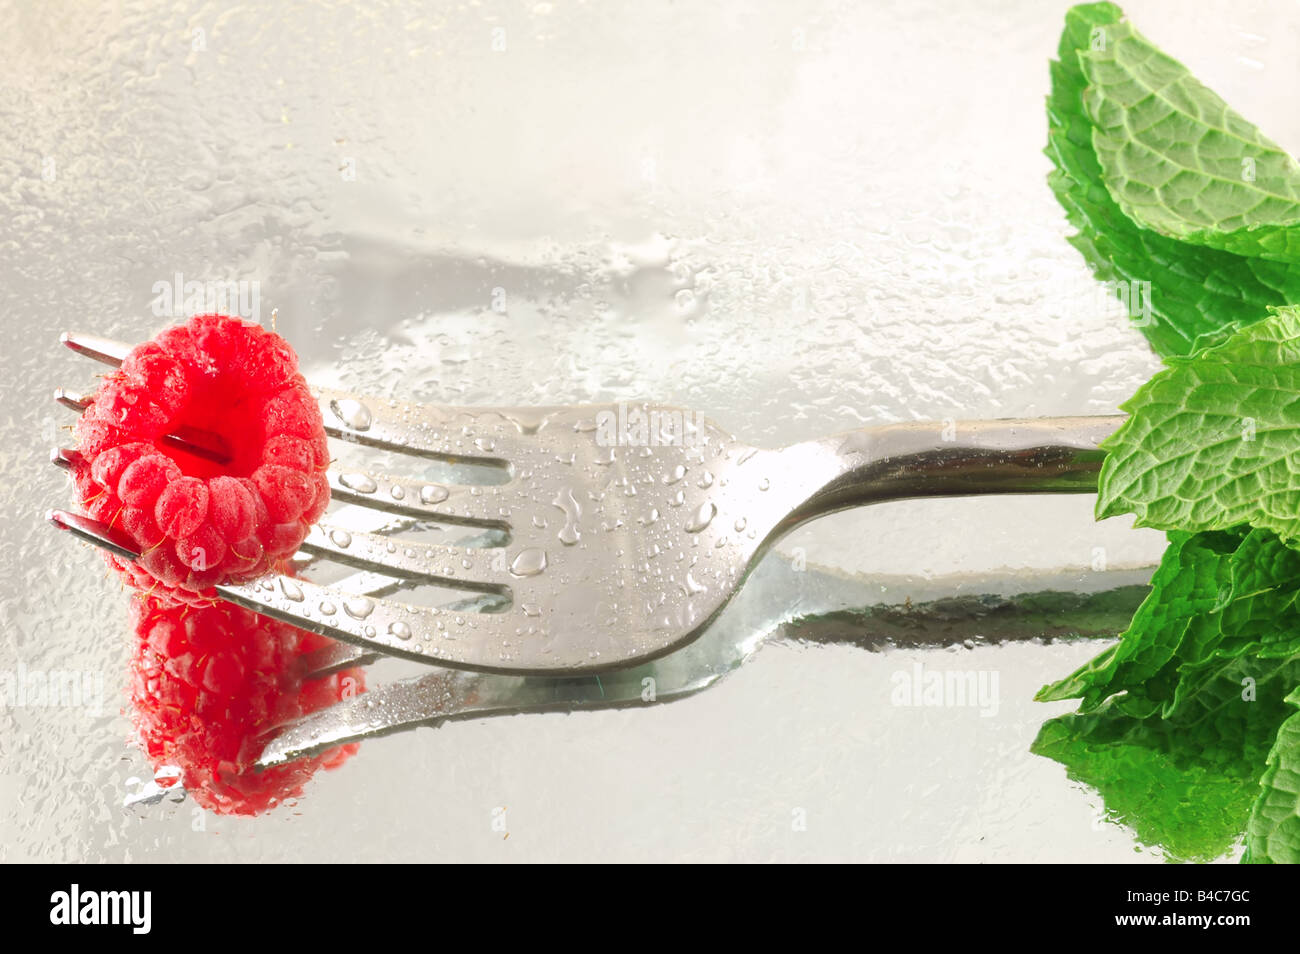 Fresh chilled raspberry on a fork with mint on a reflective background shaped like a long stem rose Stock Photo